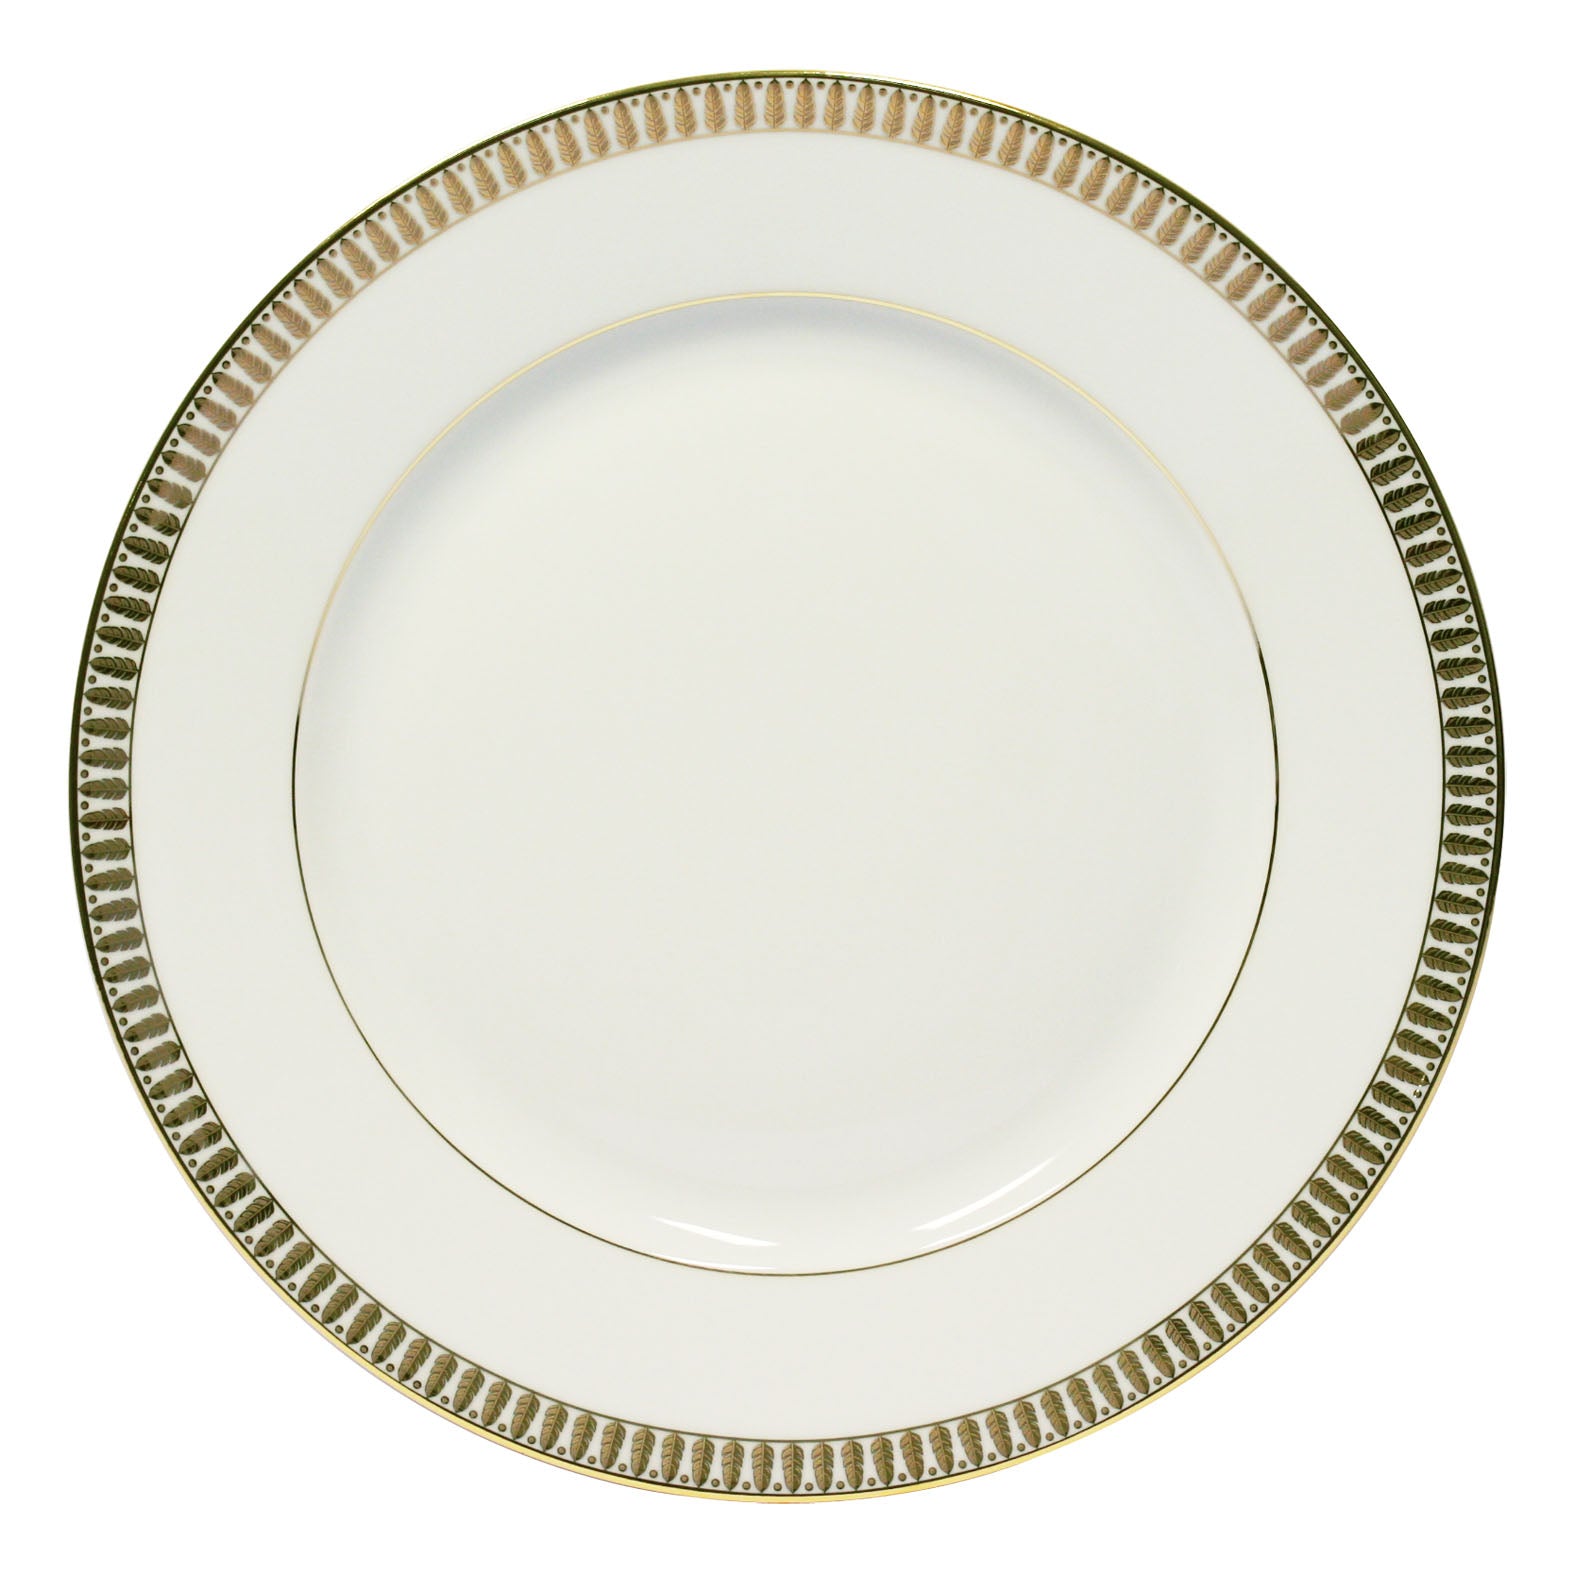 Plumes Large Dinner Plate in Gold